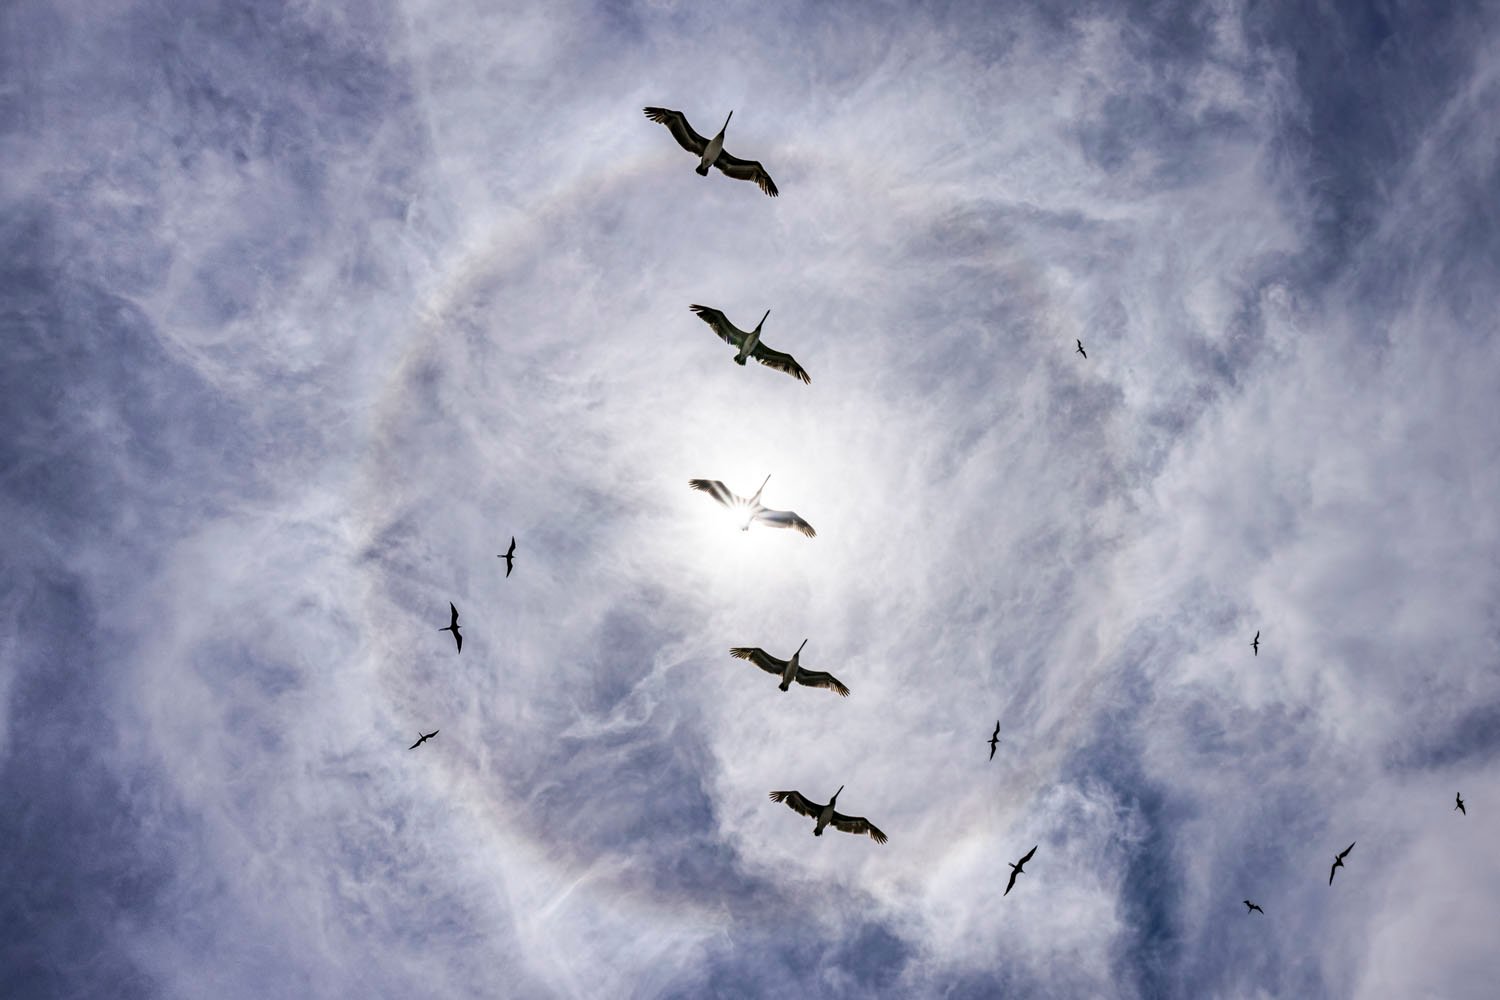 A flock of birds flying high in a dramatic sky, with wispy clouds surrounding a bright sun at the center, forming a radiant halo effect.